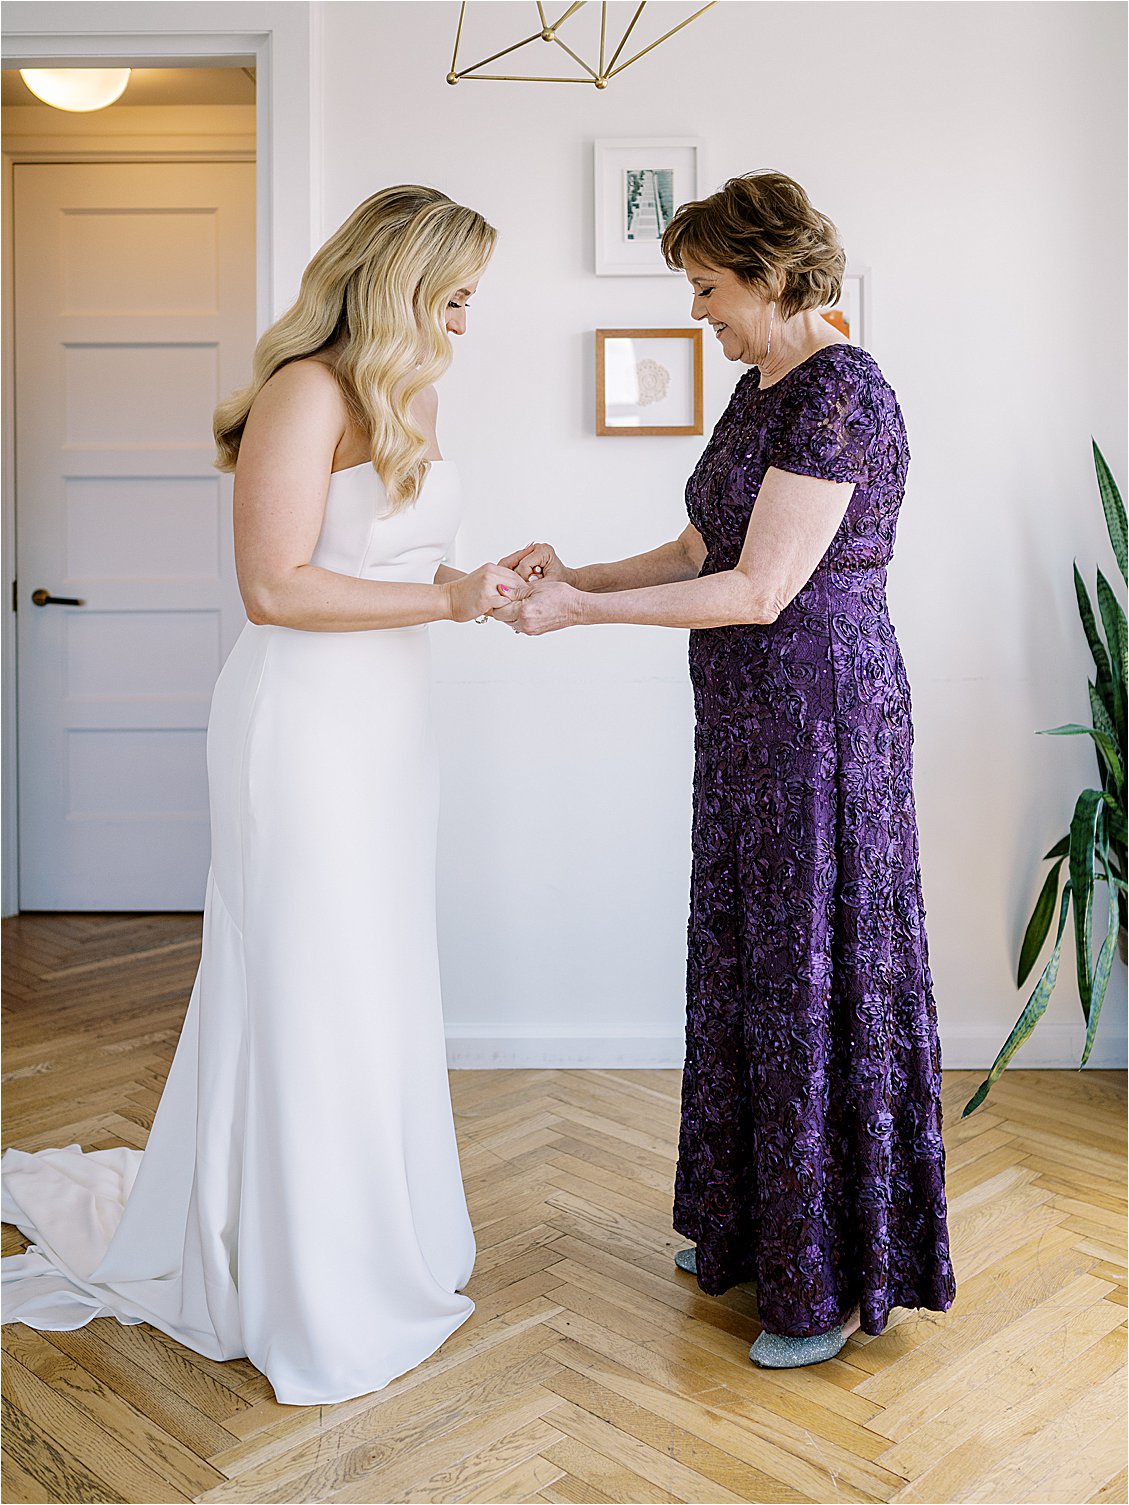 Bride and Mother sharing a moment before she walks down the aisle